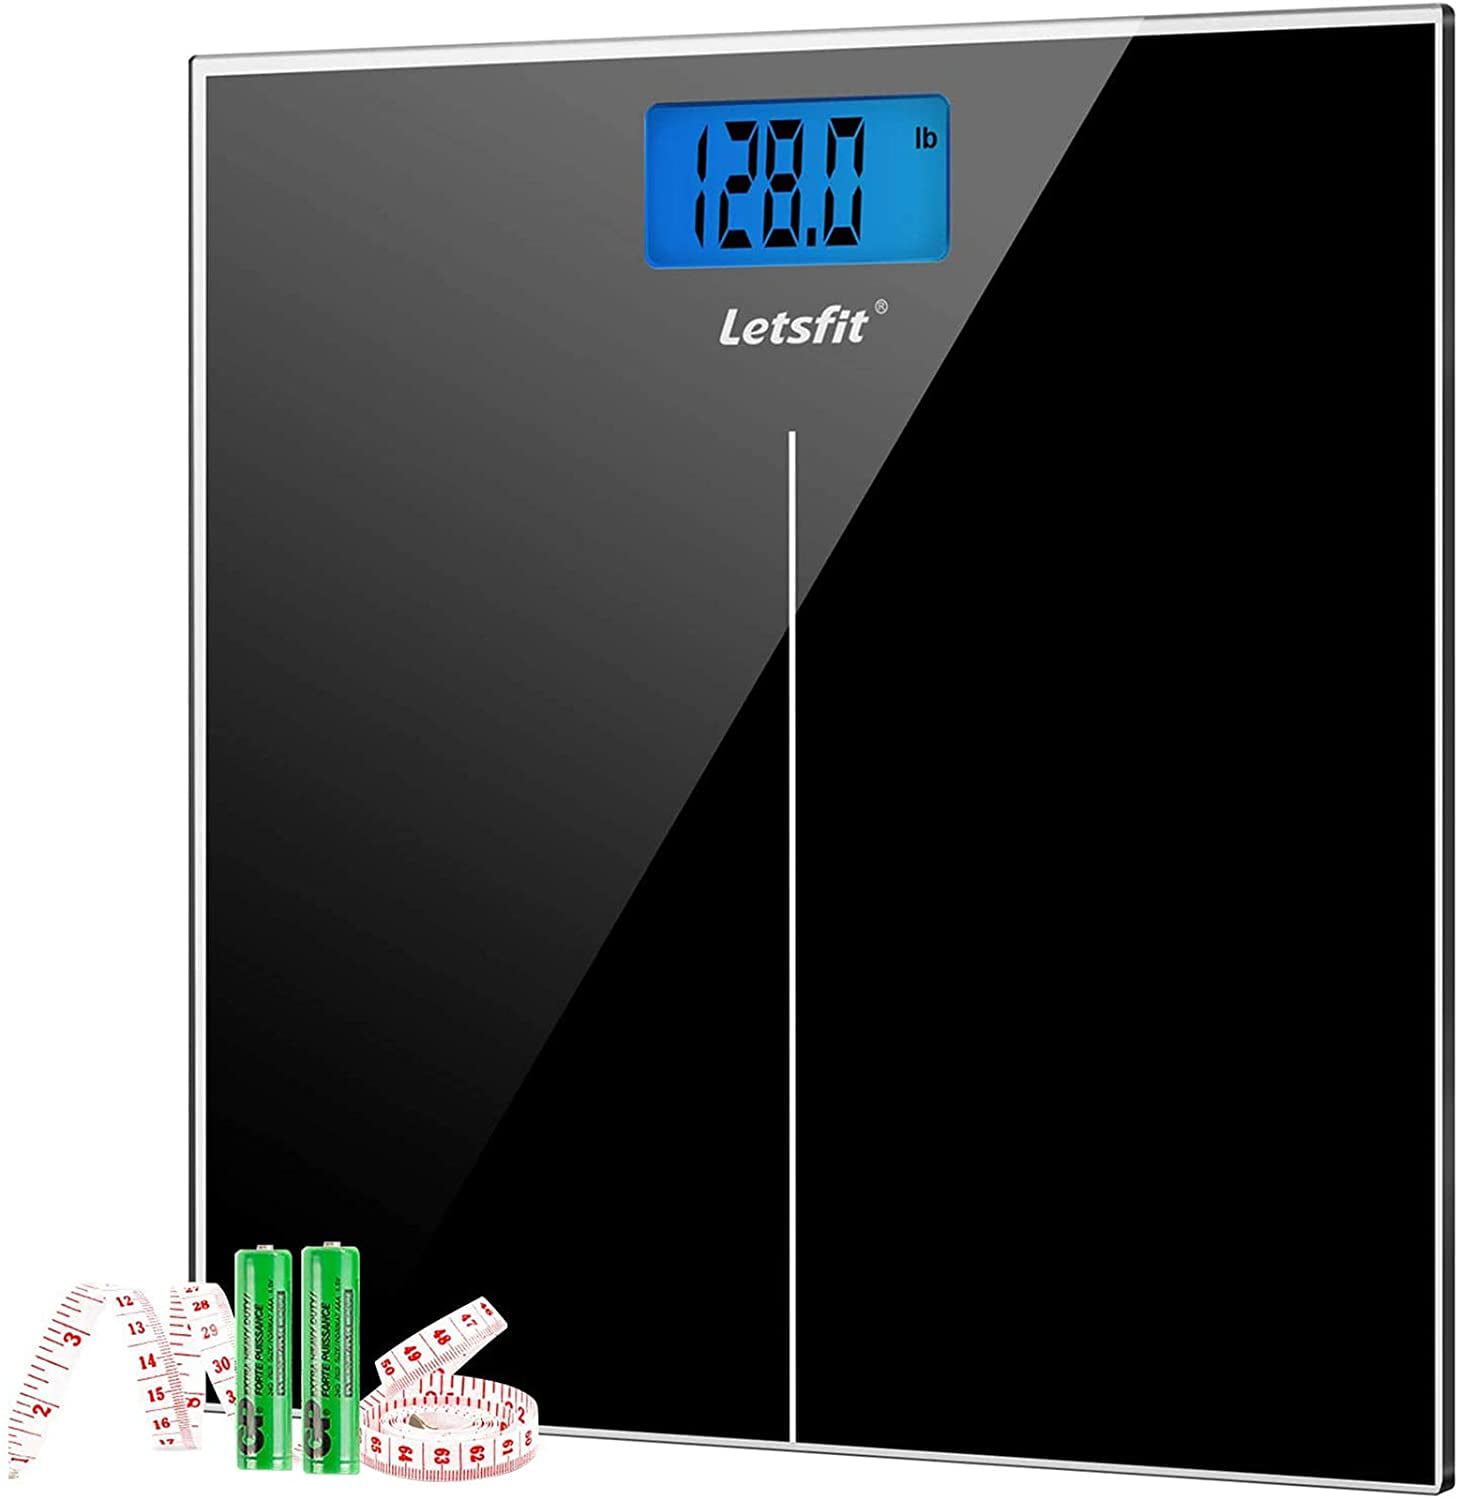 Large Backlight Display and Step-On Technology,400 lb//180kg High Precision Body Weighing Scales Weight Scales Body Tape Measure Included NUTRI FIT Digital Bathroom Scale BMI